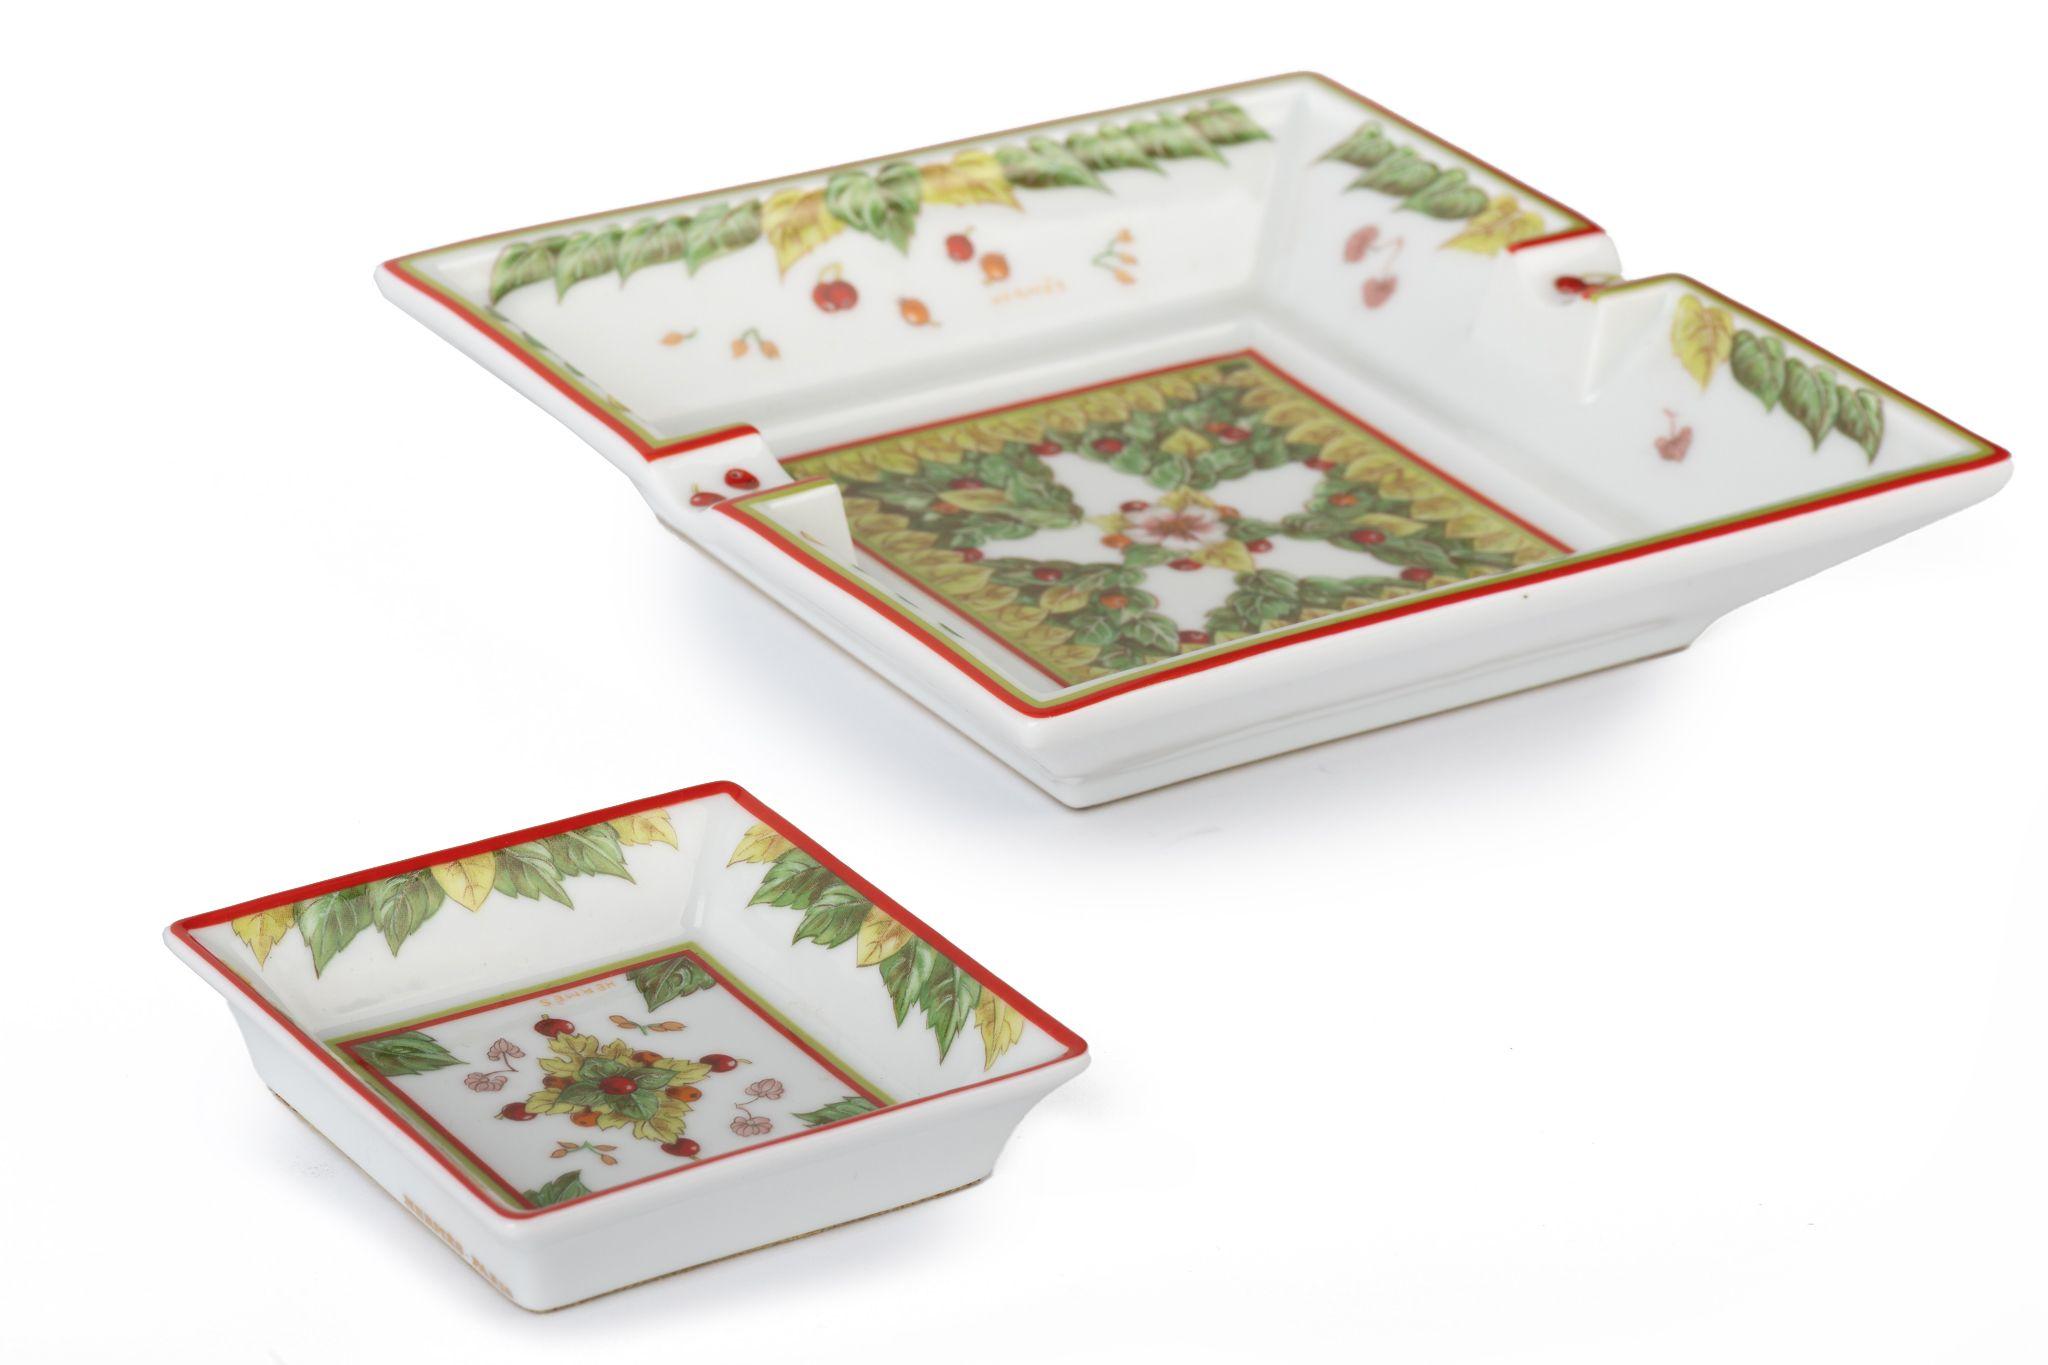 Hermès two-piece set ashtray in white porcelain with Christmas decorations in green. Suede stamped bottom. Includes original box.
